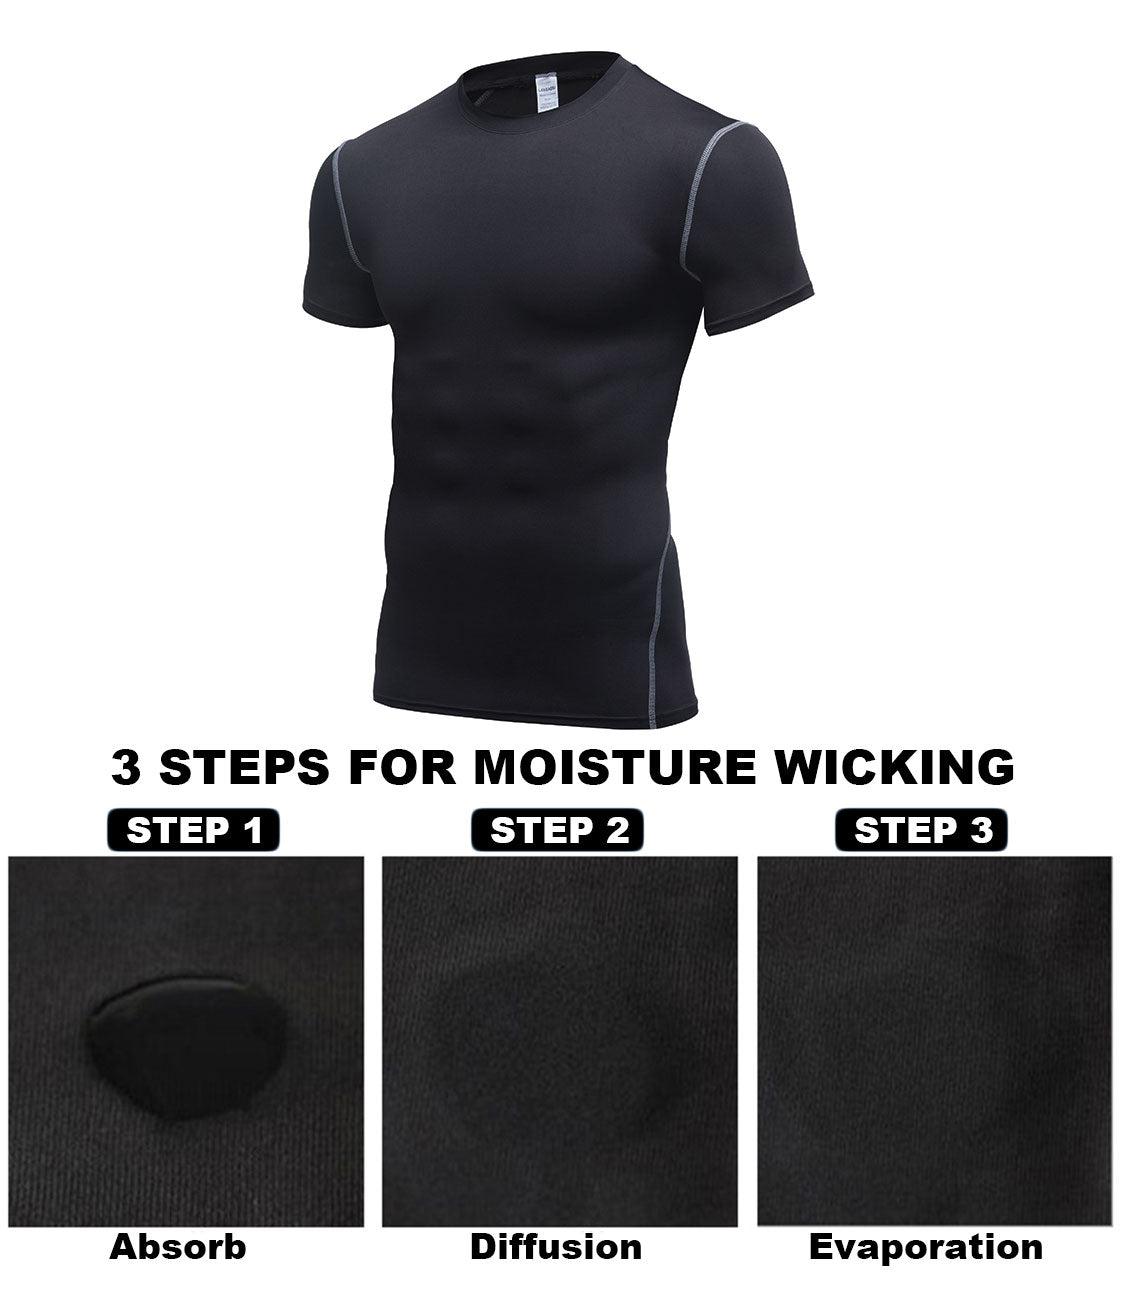  SPVISE Black Compression Shirt Men Short Sleeve Cool Dry  Athletic Workout Shirts Sports Baselayer Undershirts Gym Shirt Tops :  Clothing, Shoes & Jewelry